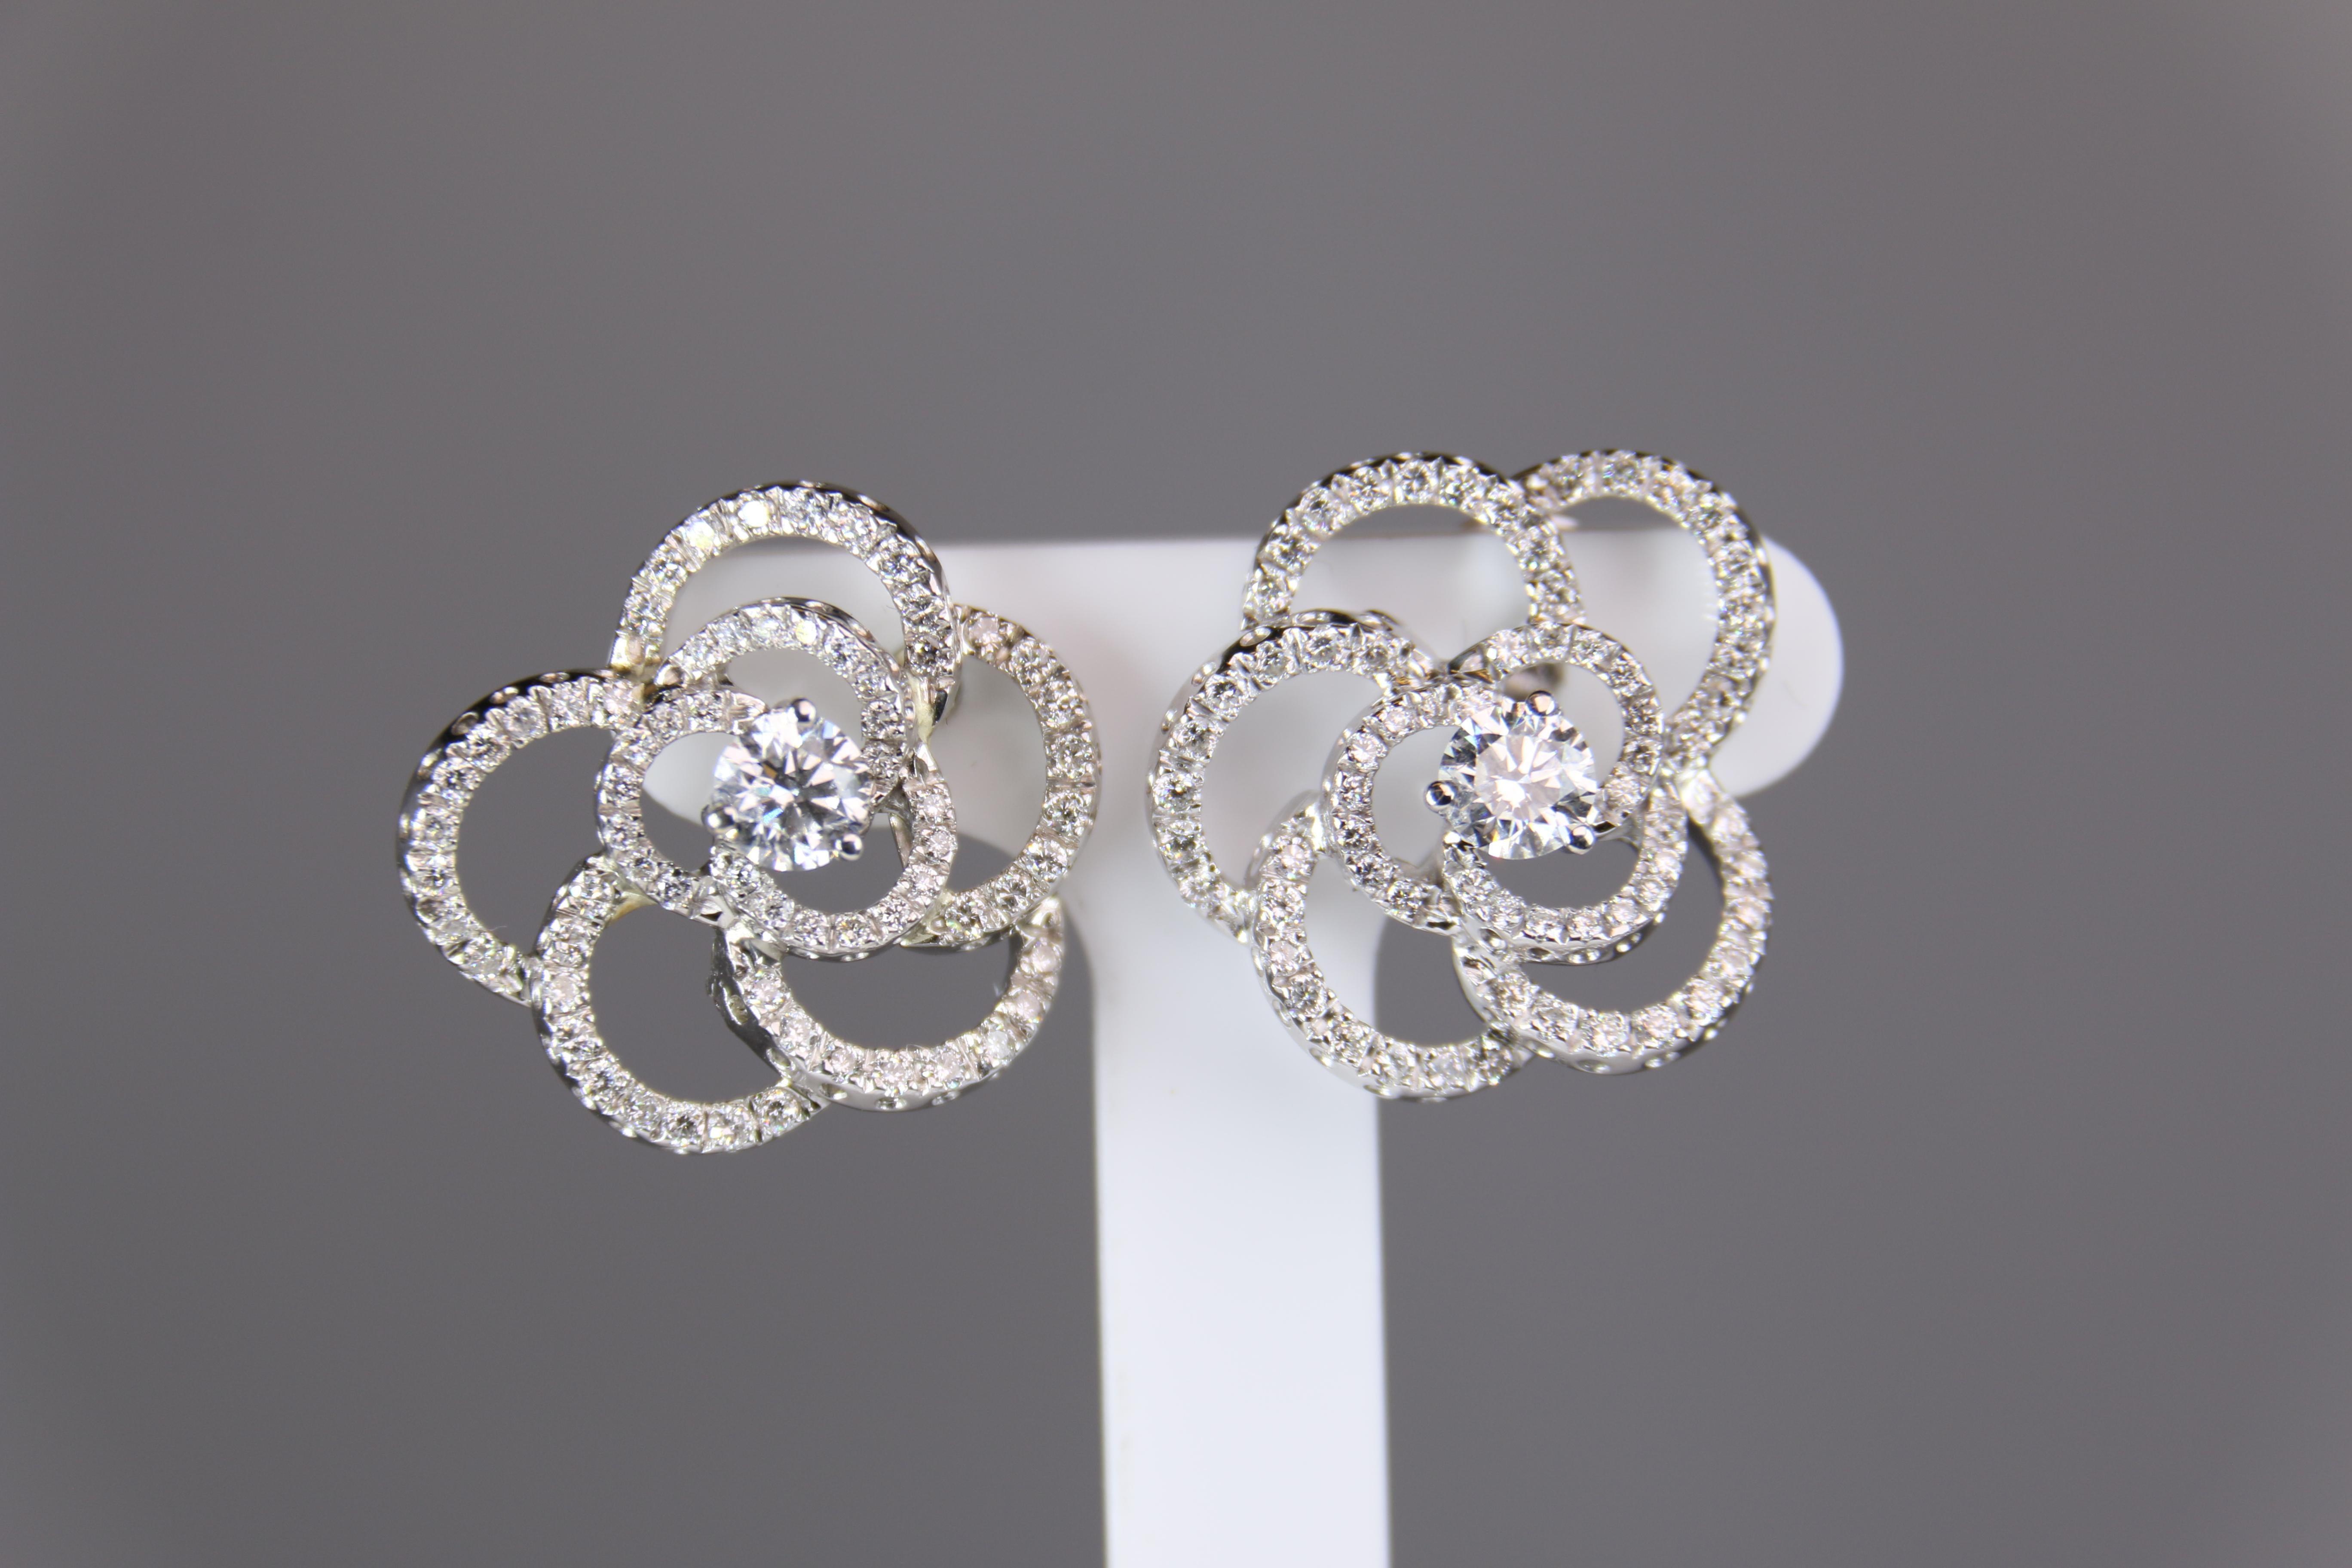 Gorgeous Rose Diamond Earrings from Renowned Designer Roberto Coin.